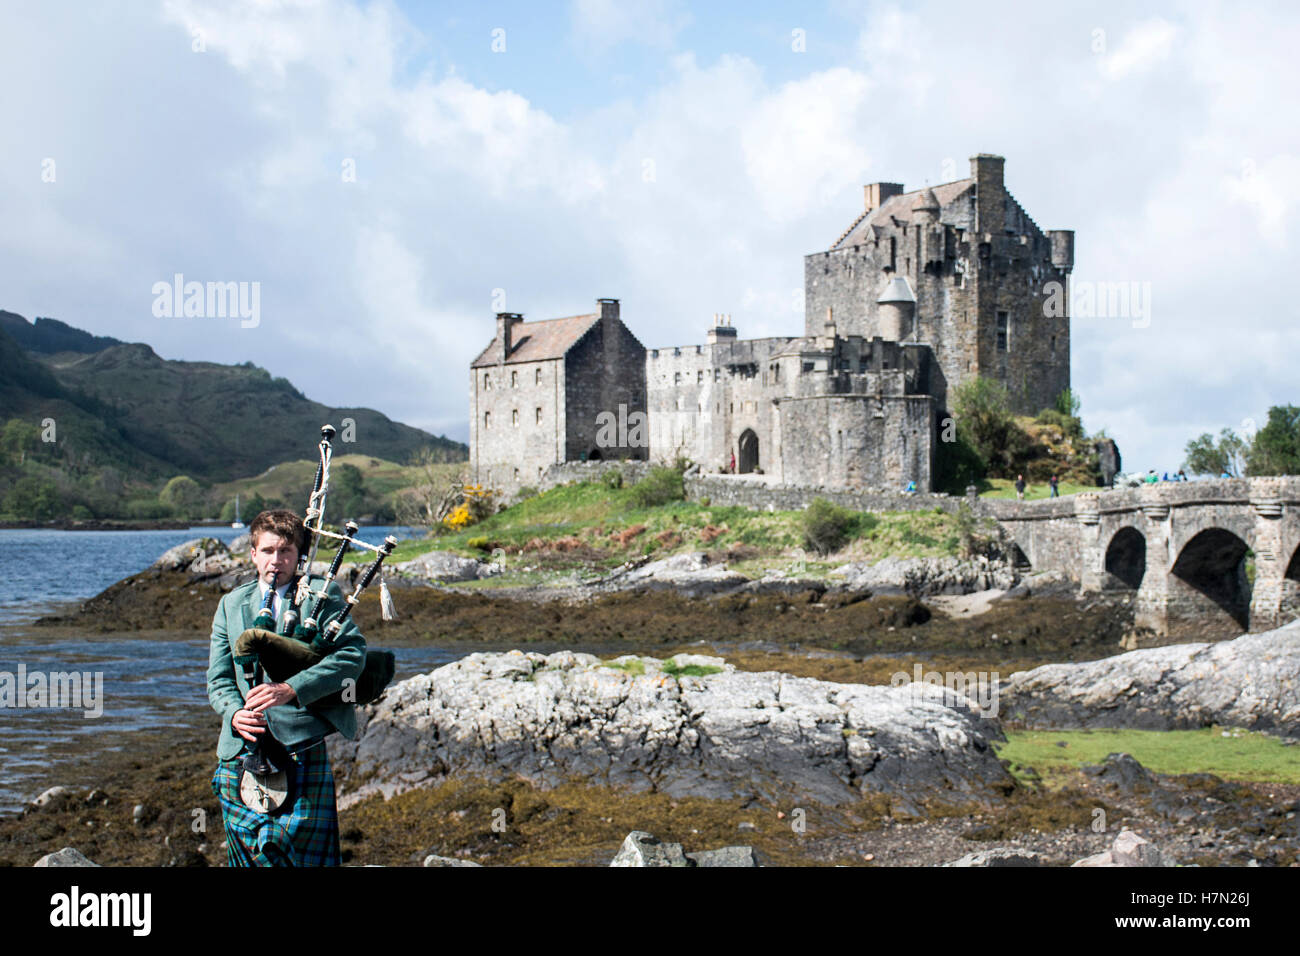 Pipebag player in front of Eilean Donan Castle Isle of Sky Scotland United Kingdom 20.05.2016 Stock Photo